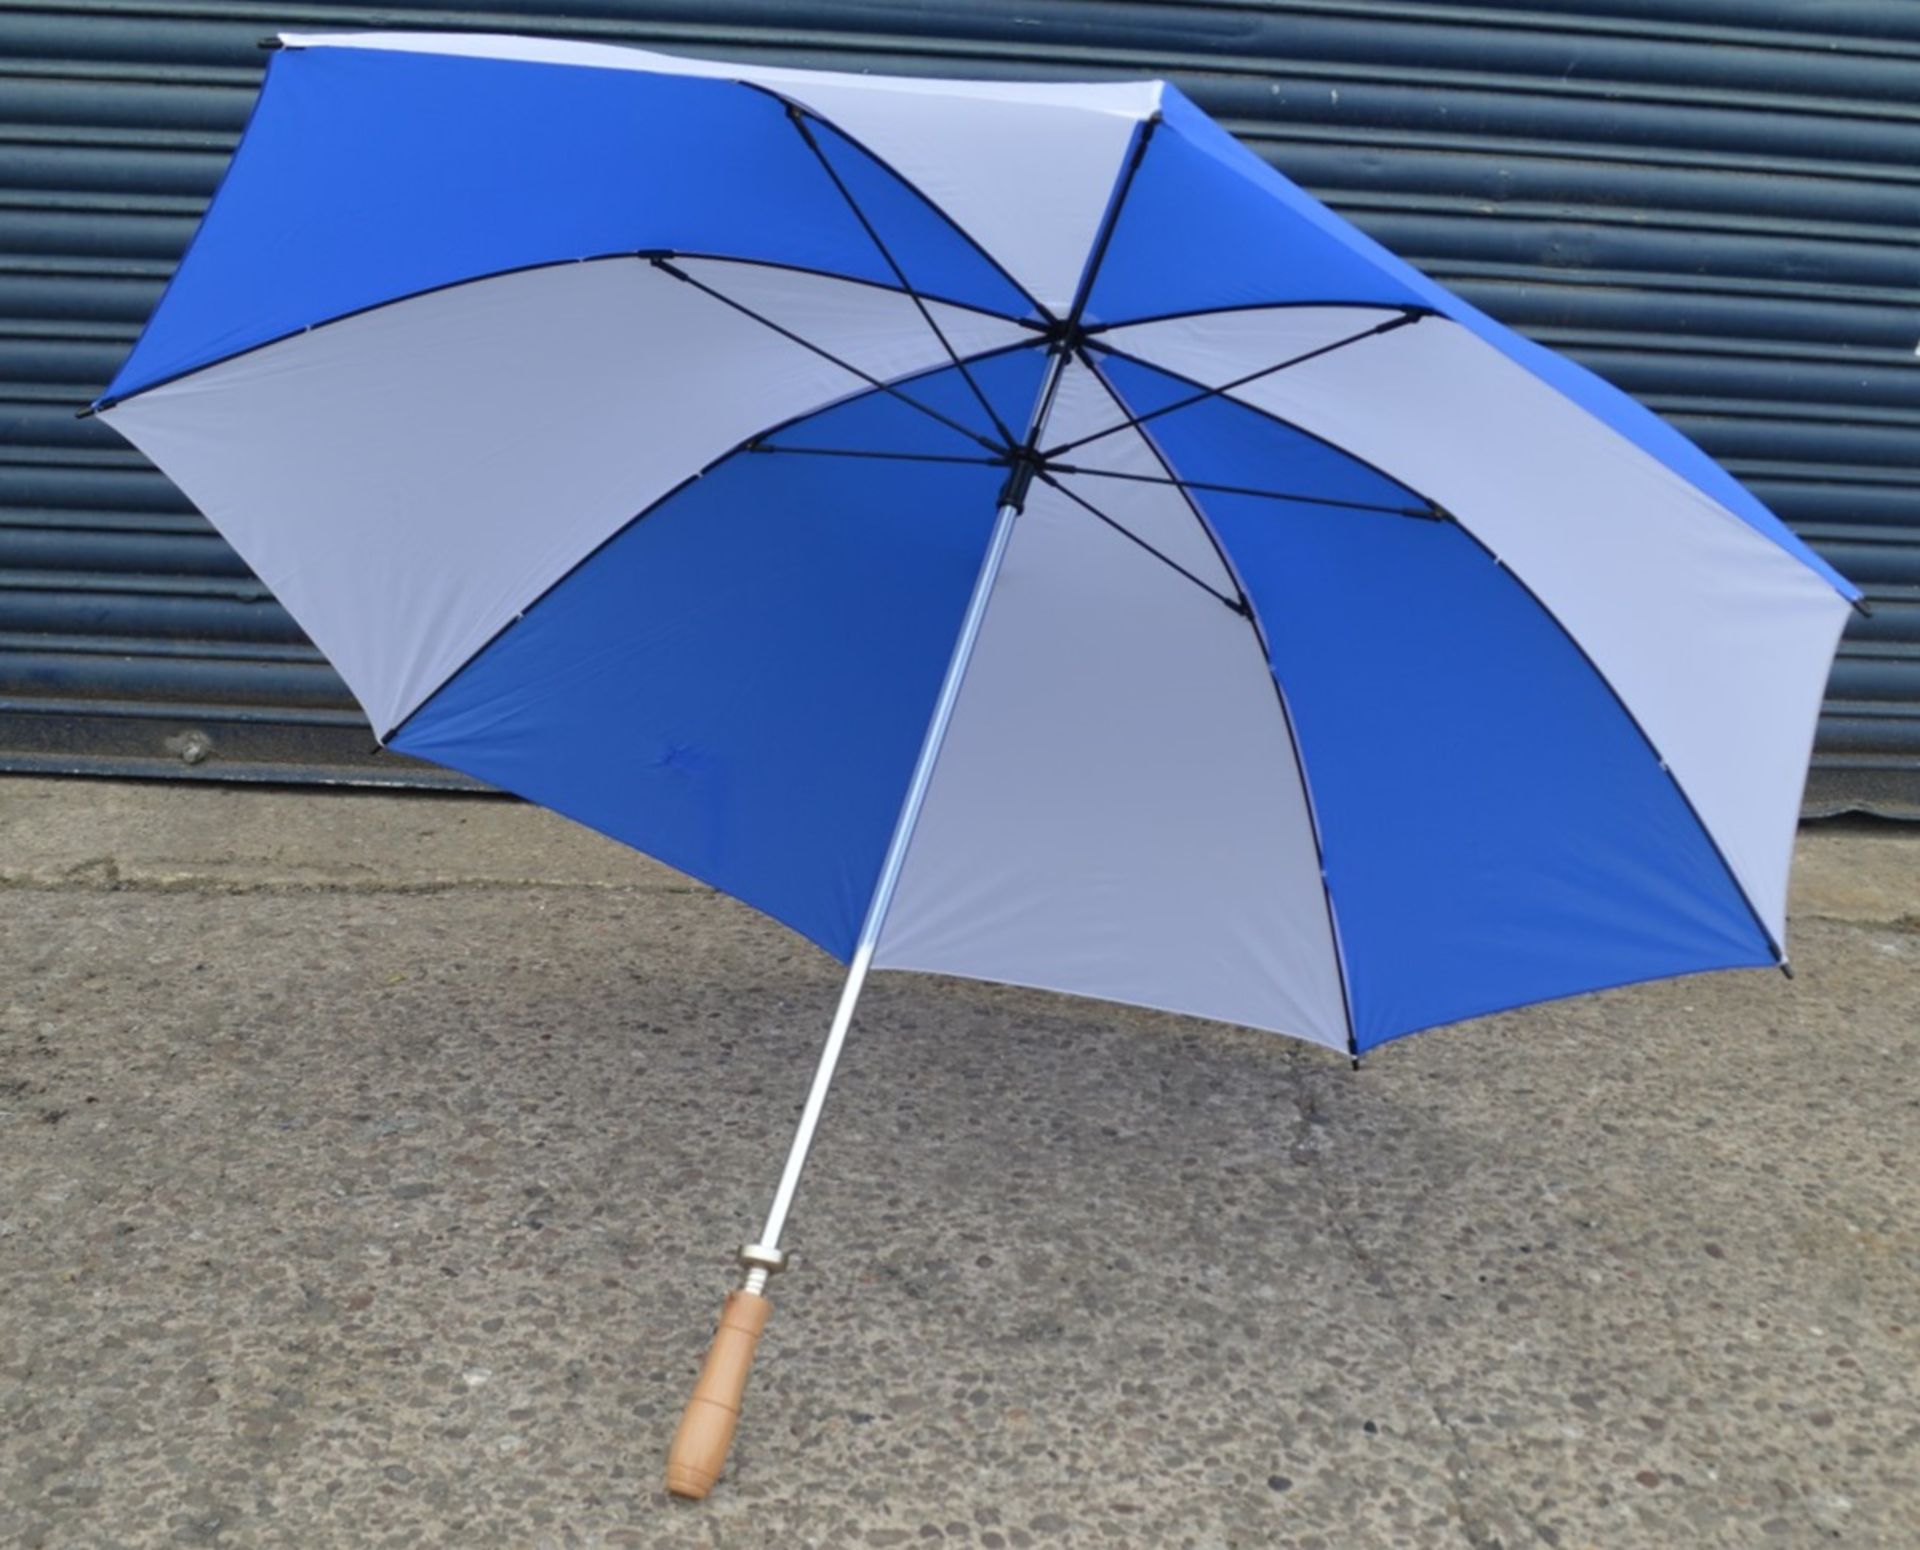 24 x Proline Golf Umbrellas - Colour: Light Blue And White - Brand New Sealed Stock - Dimensions: - Image 2 of 5